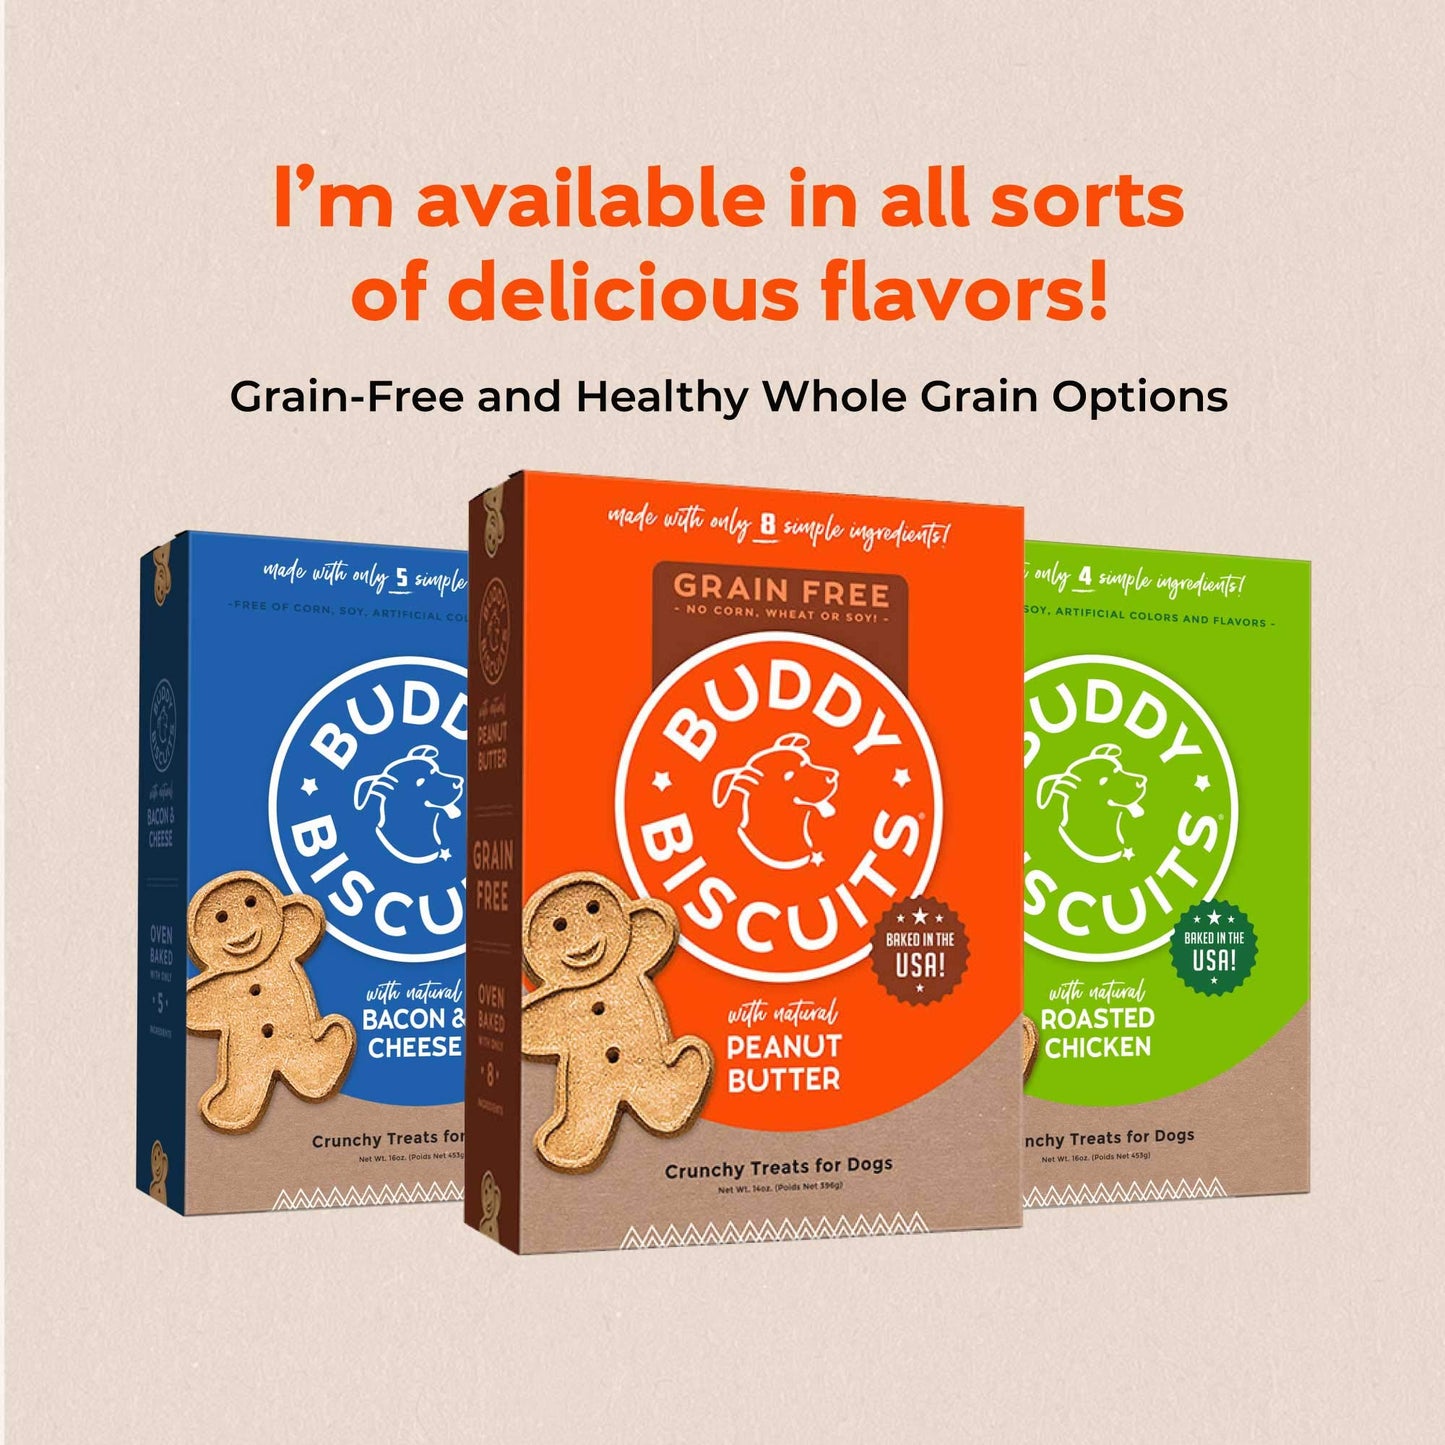 Buddy Biscuits Oven-Baked, Healthy Whole-Grain, Crunchy Treats for Dogs